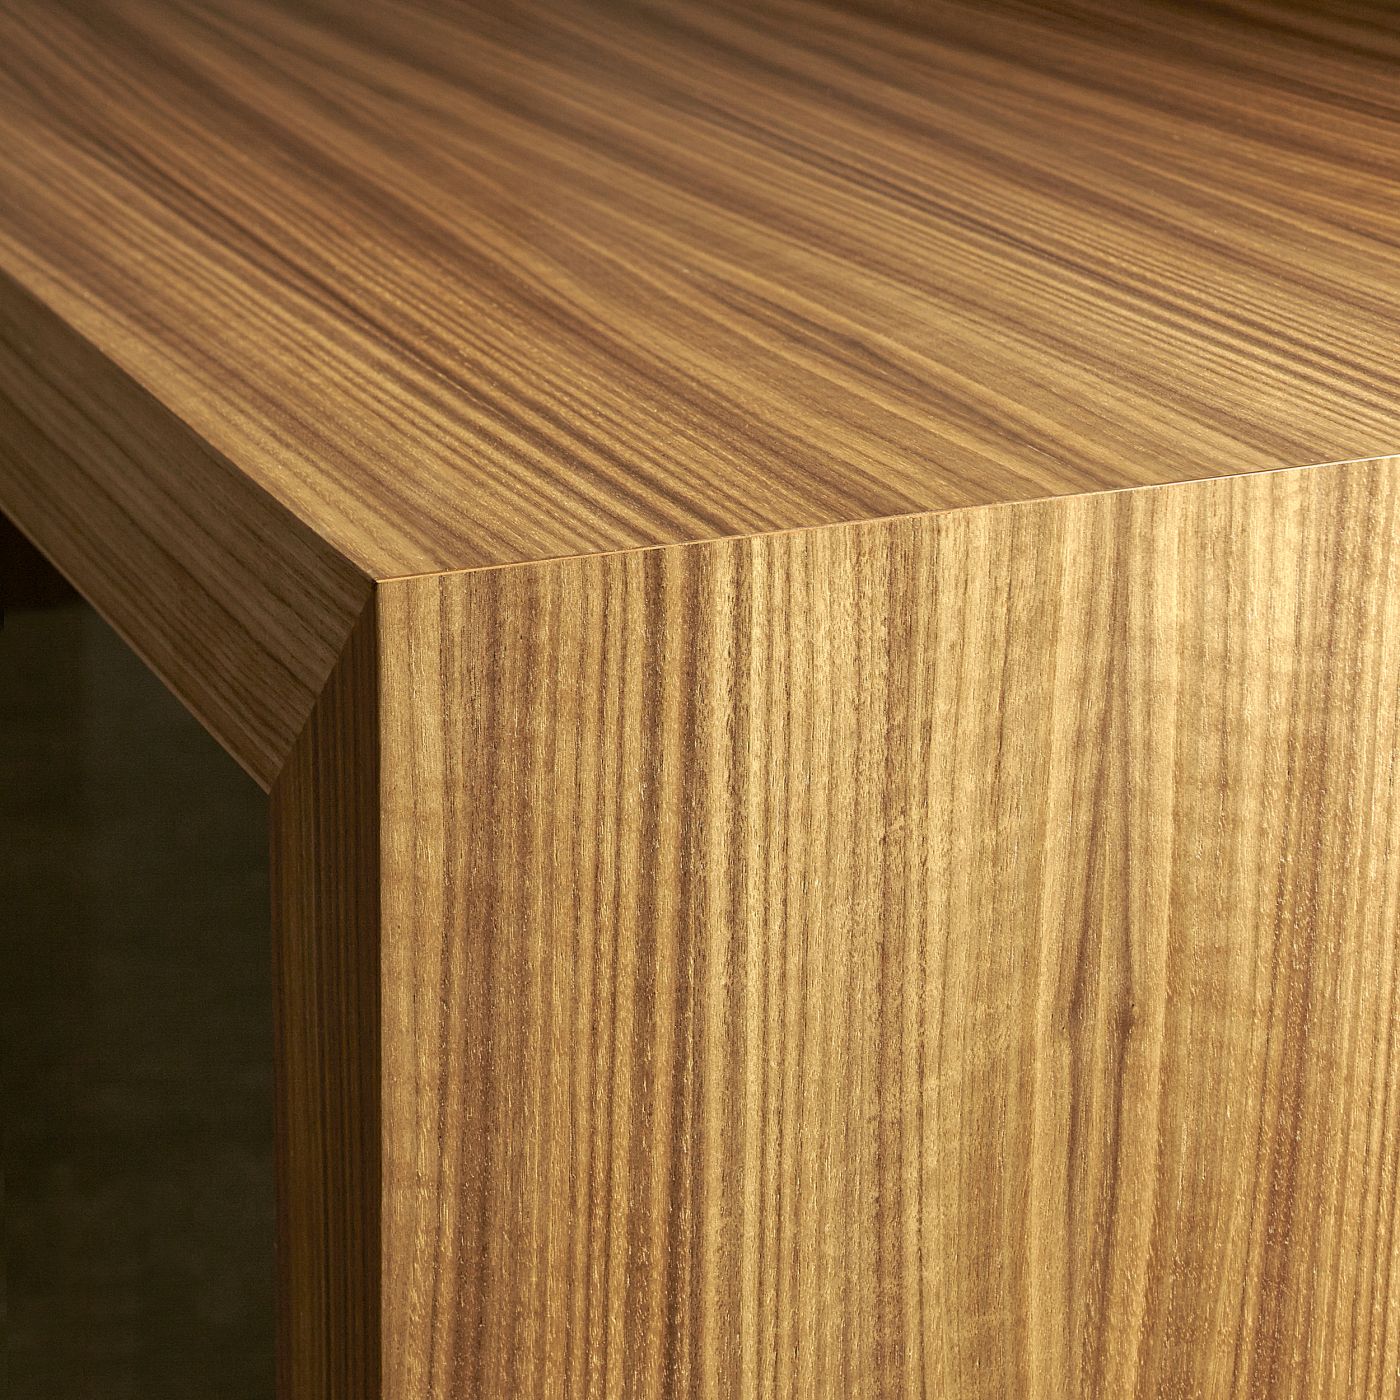 Hugo offers perfectly mitered joinery with matched veneers.